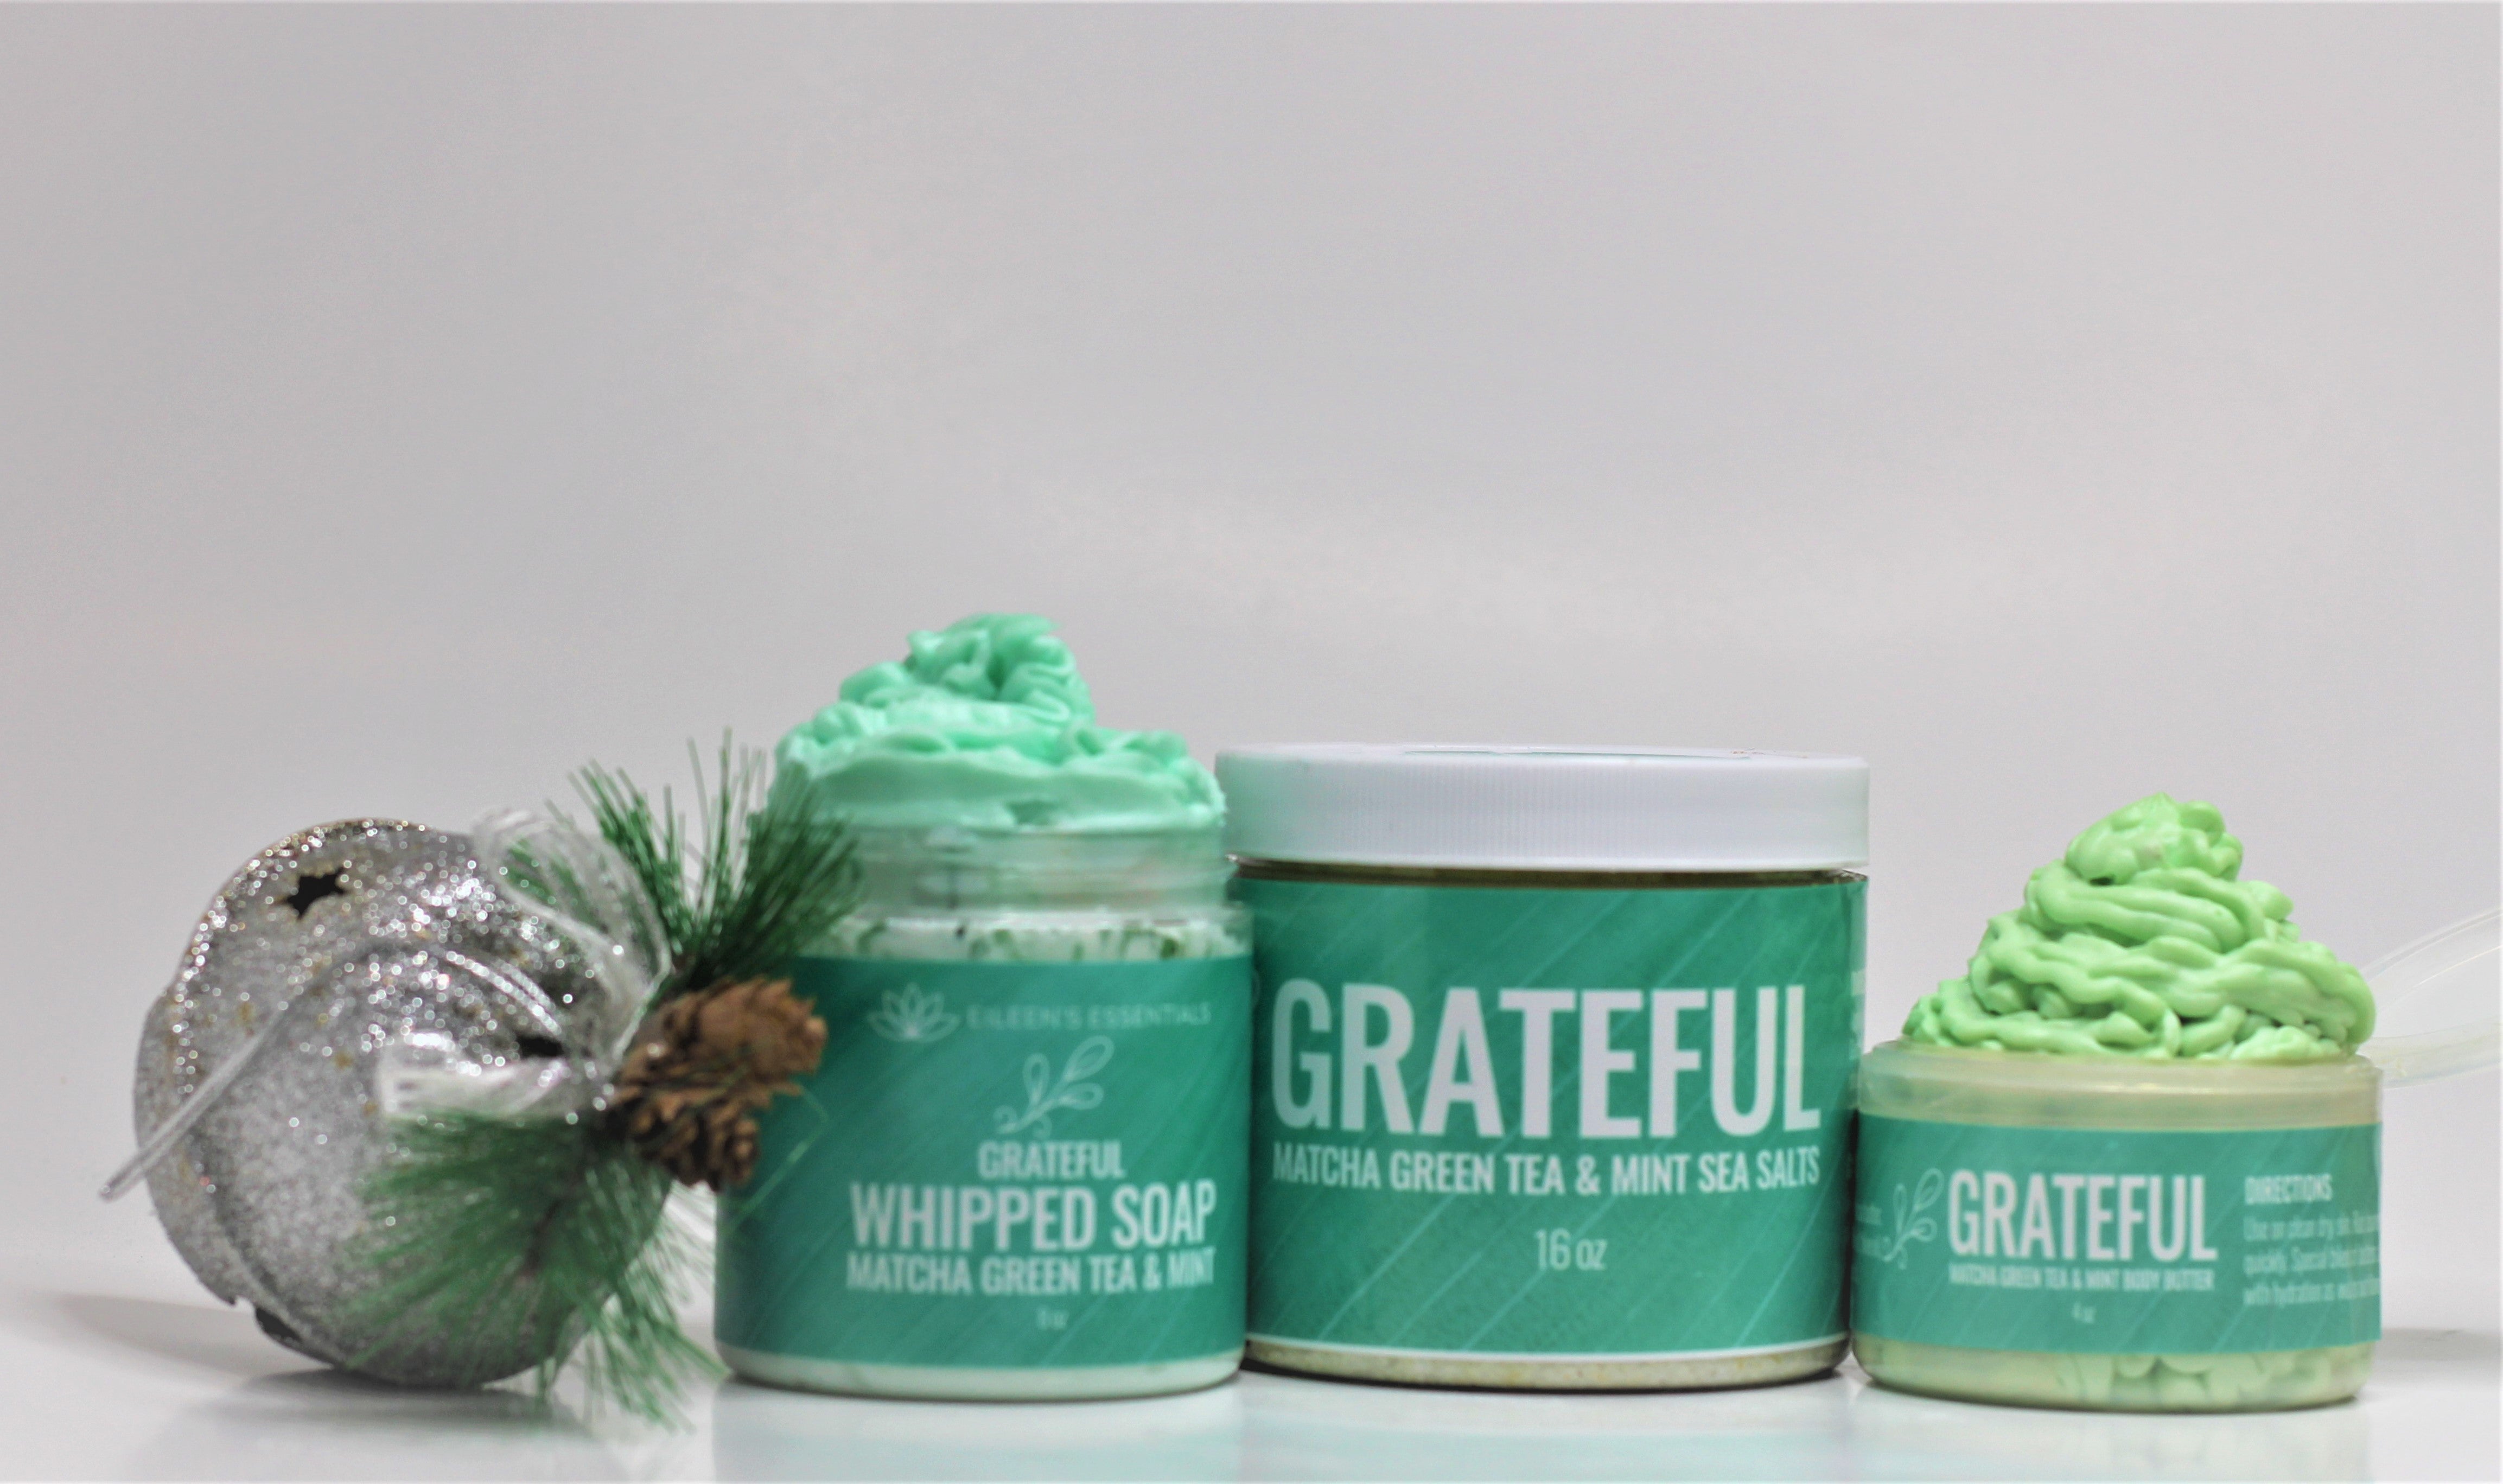 Skincare Collection/Whipped Soap; GRATEFUL (Matcha Green Tea & Mint)